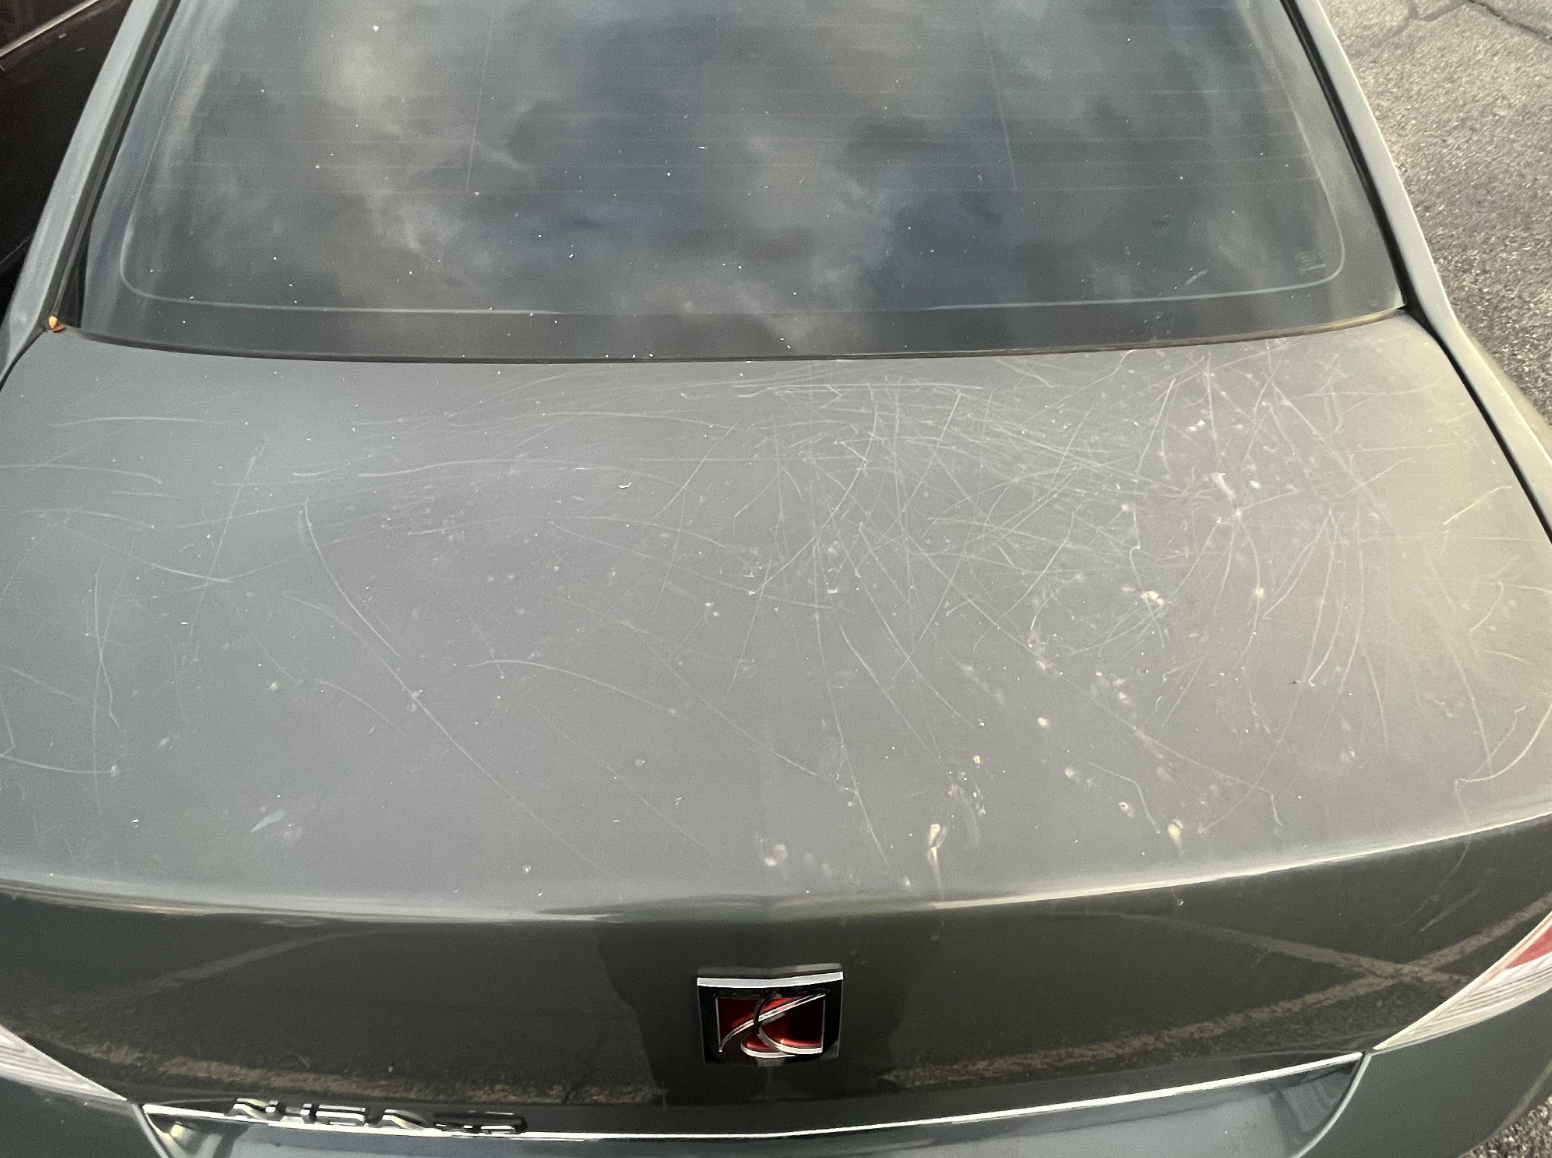 scratches on the trunk of the car